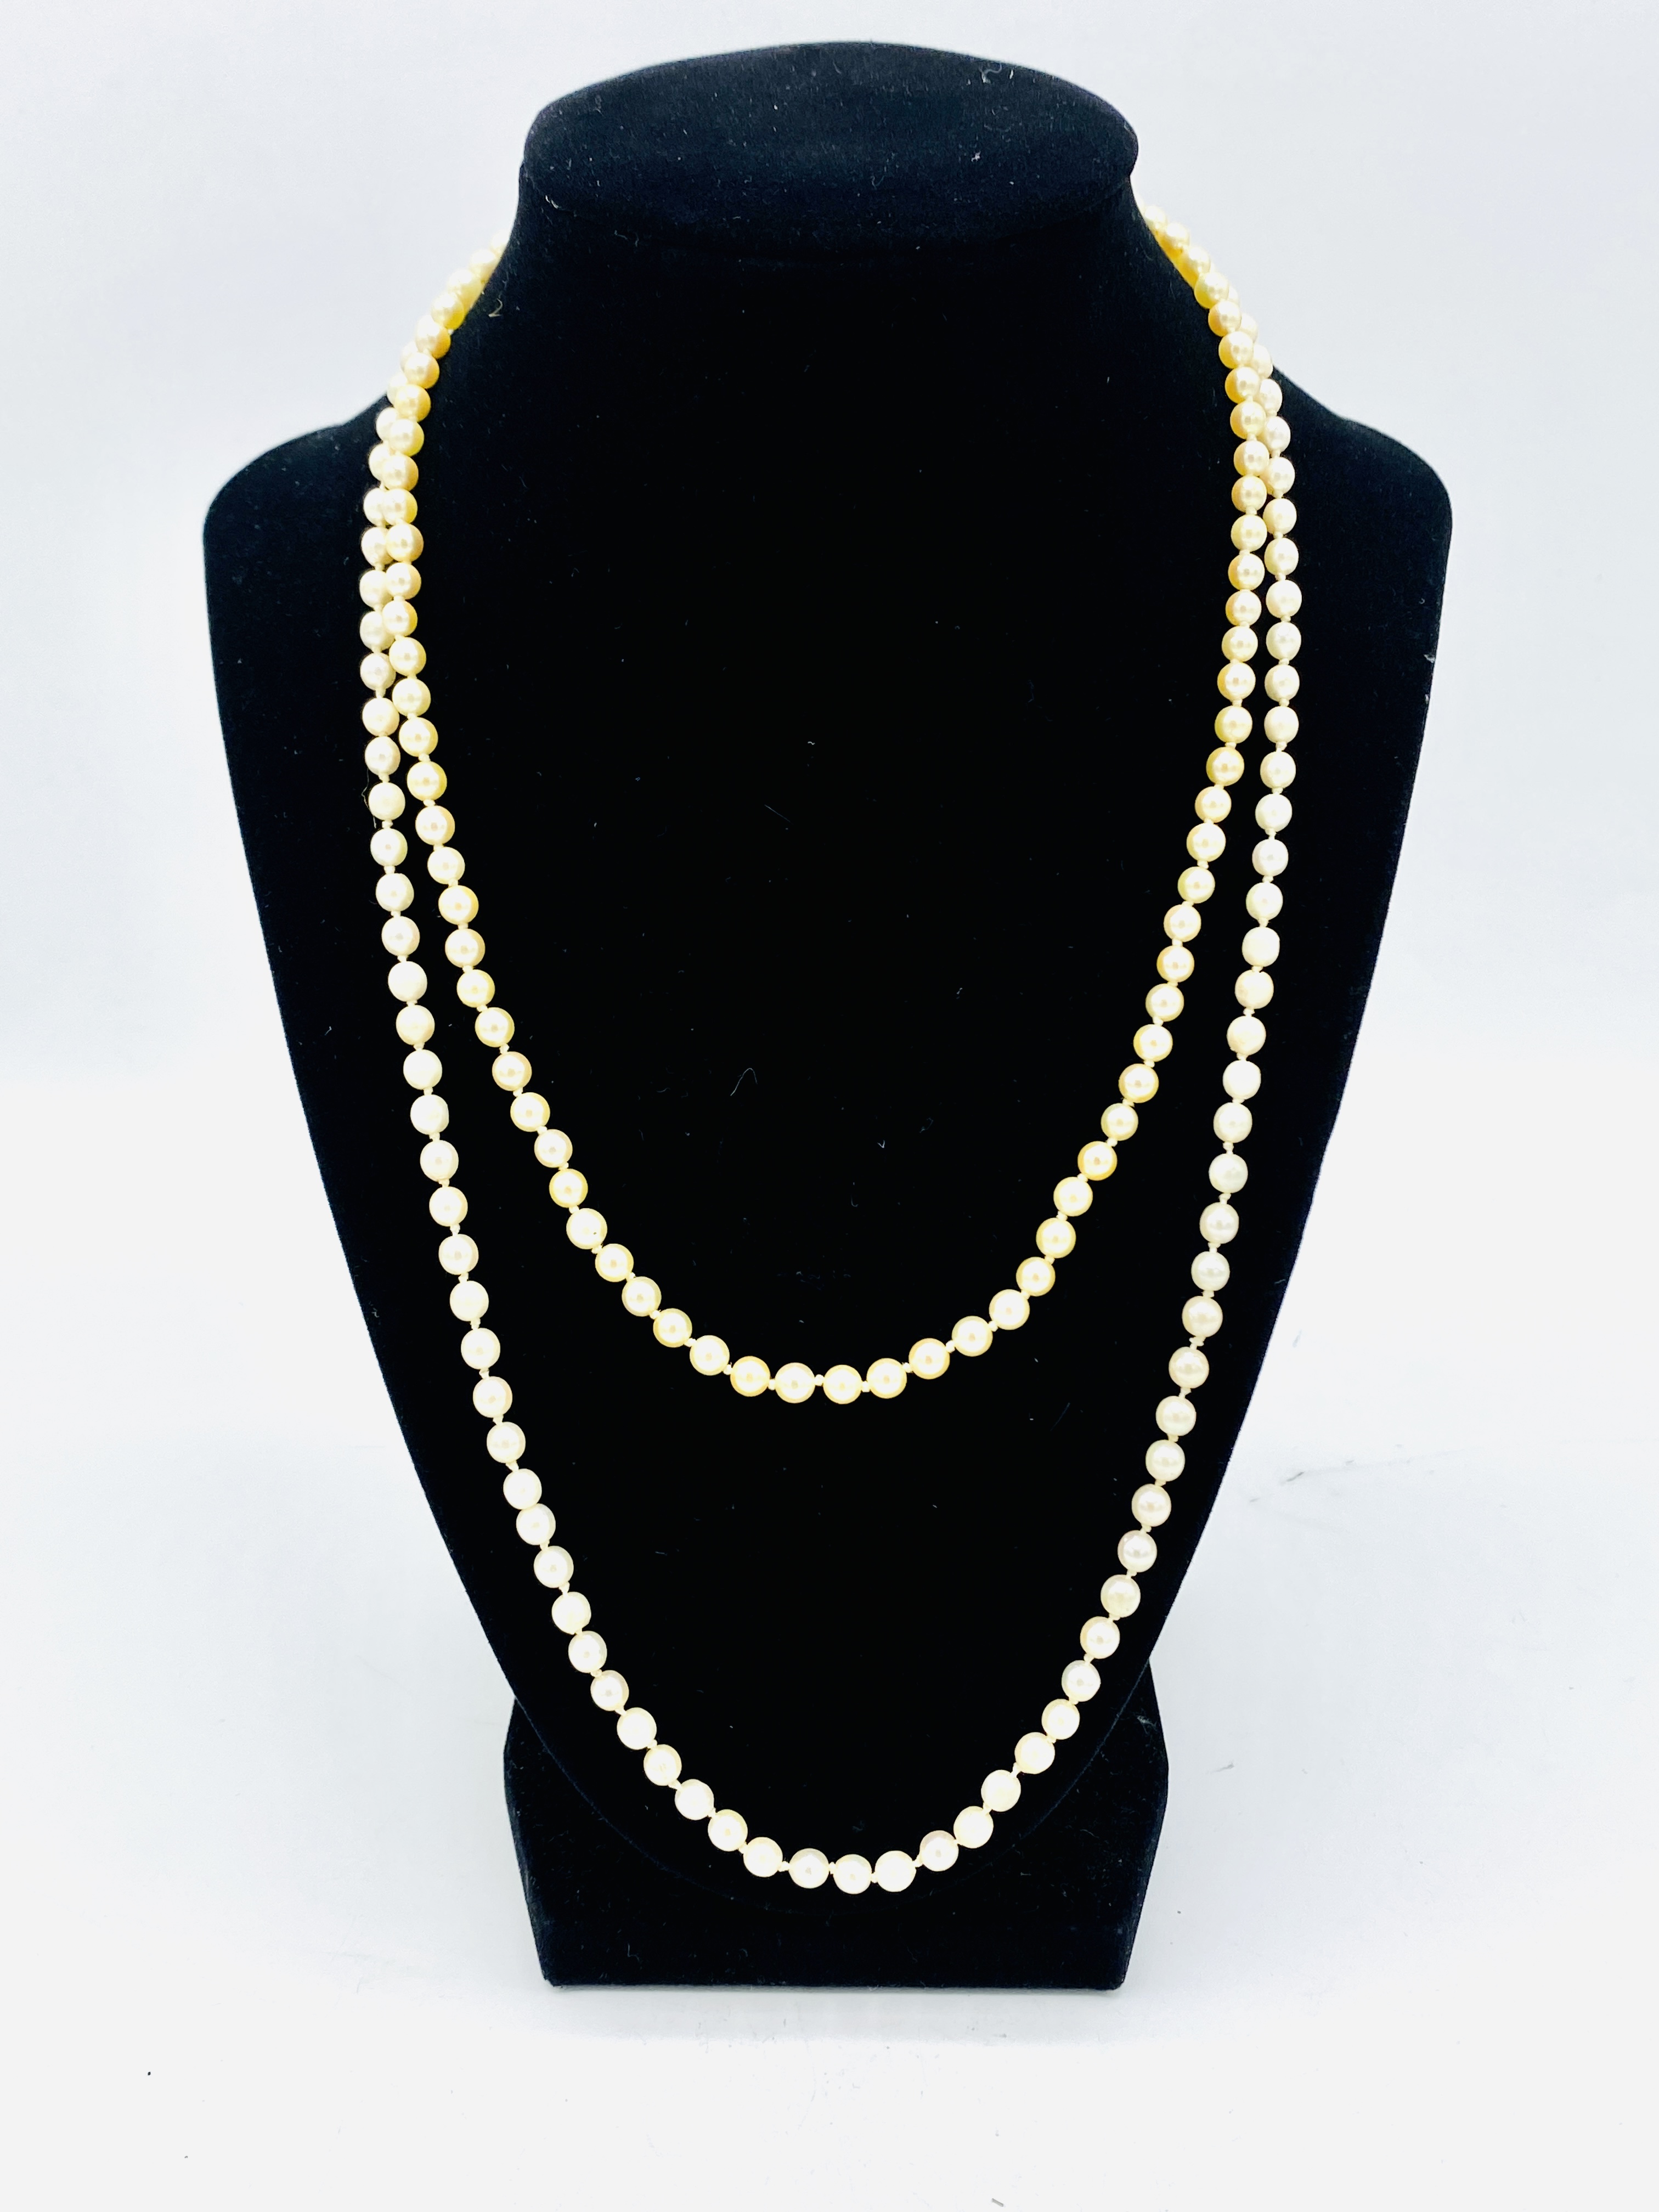 Two strings of pearls with gold clasps